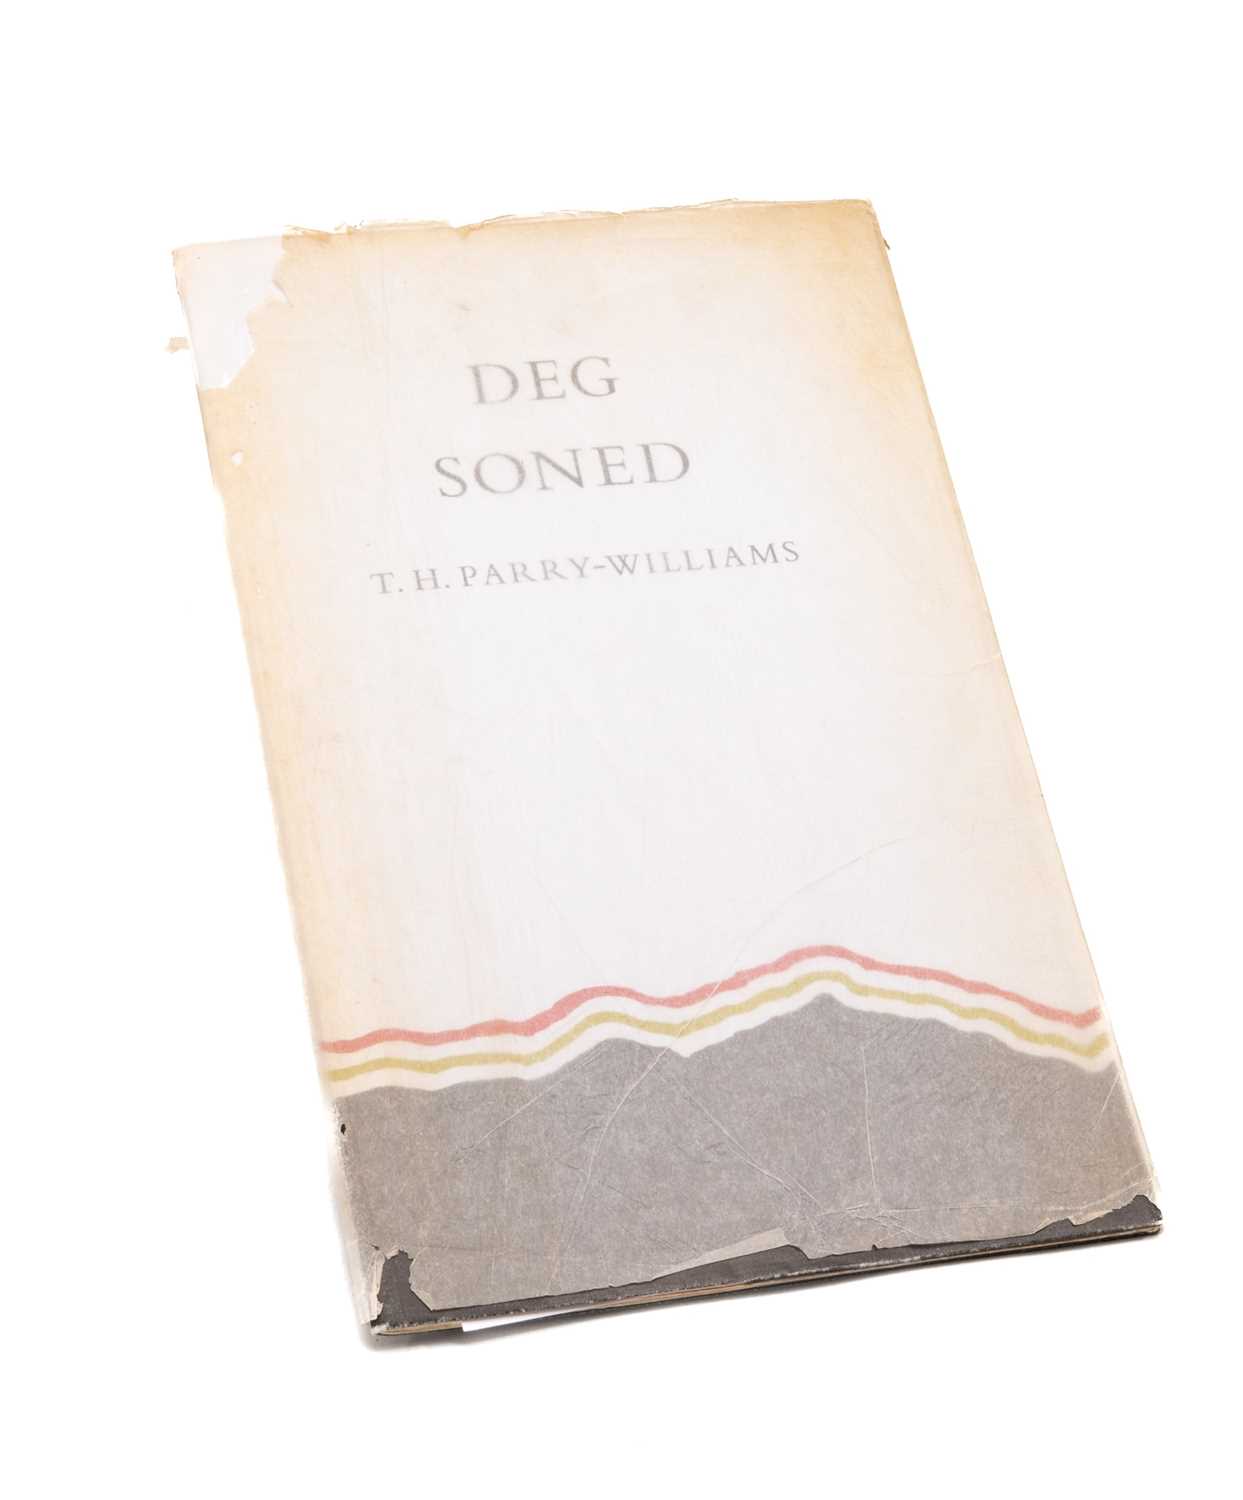 PARRY-WILLIAMS (T.H.) 'Deg Soned', limited edition (17/270) copy from Gregynog Press 1987, all - Image 2 of 2